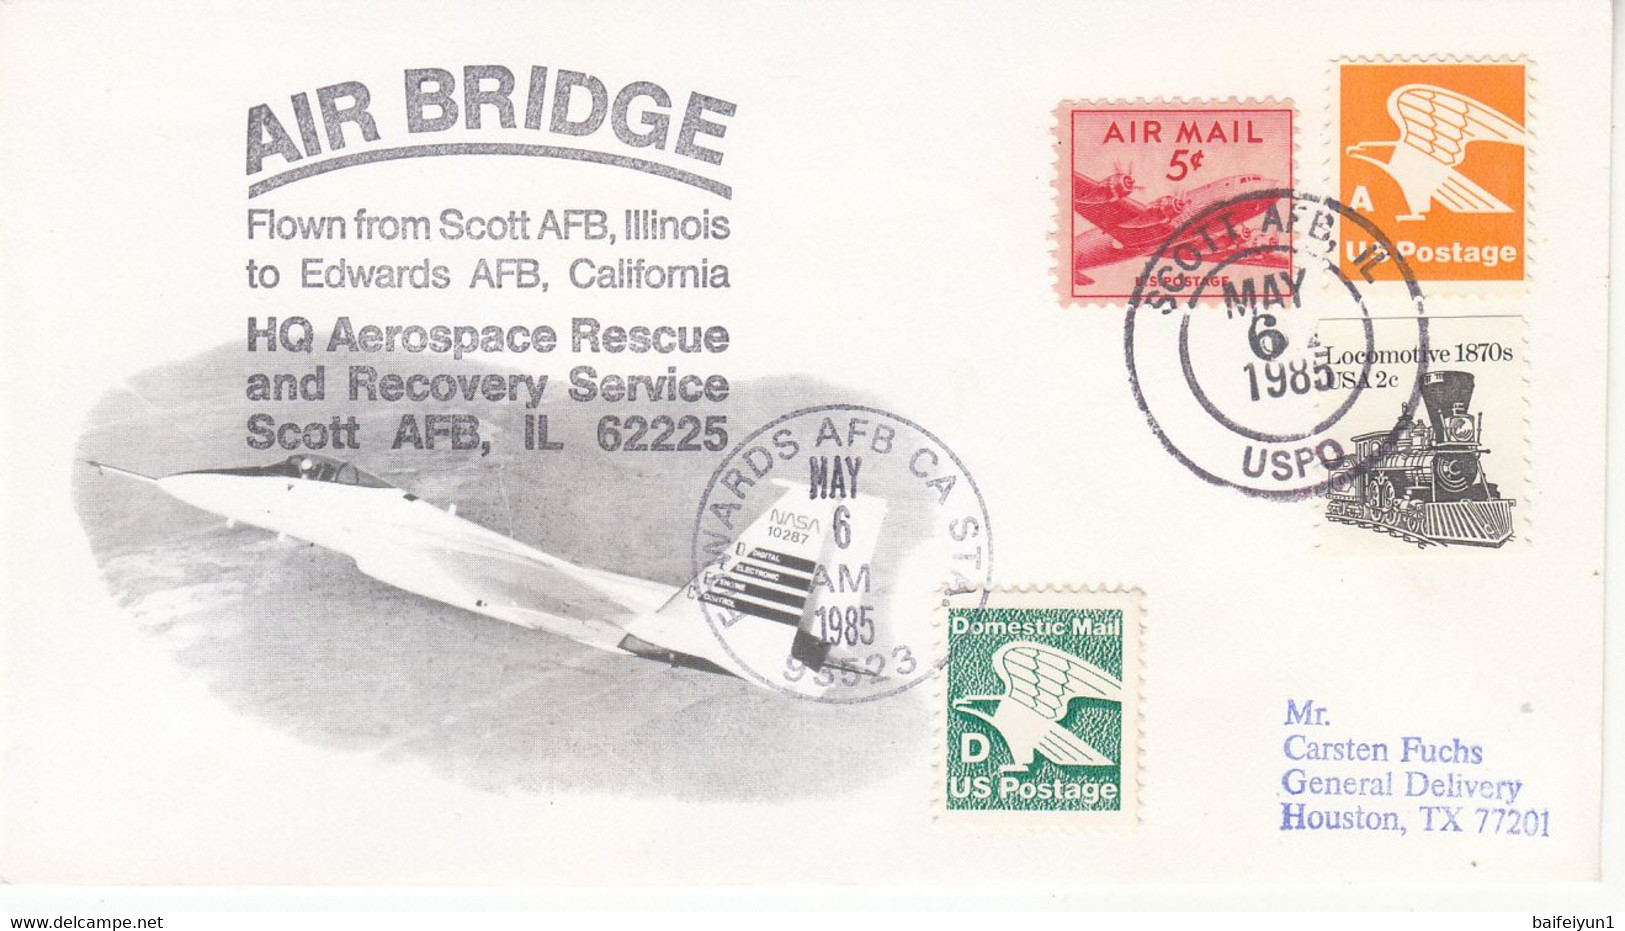 1985 USA  Space Shuttle Challenger STS-51B  Mission And Air Bridge  Commemorative Cover - Nordamerika